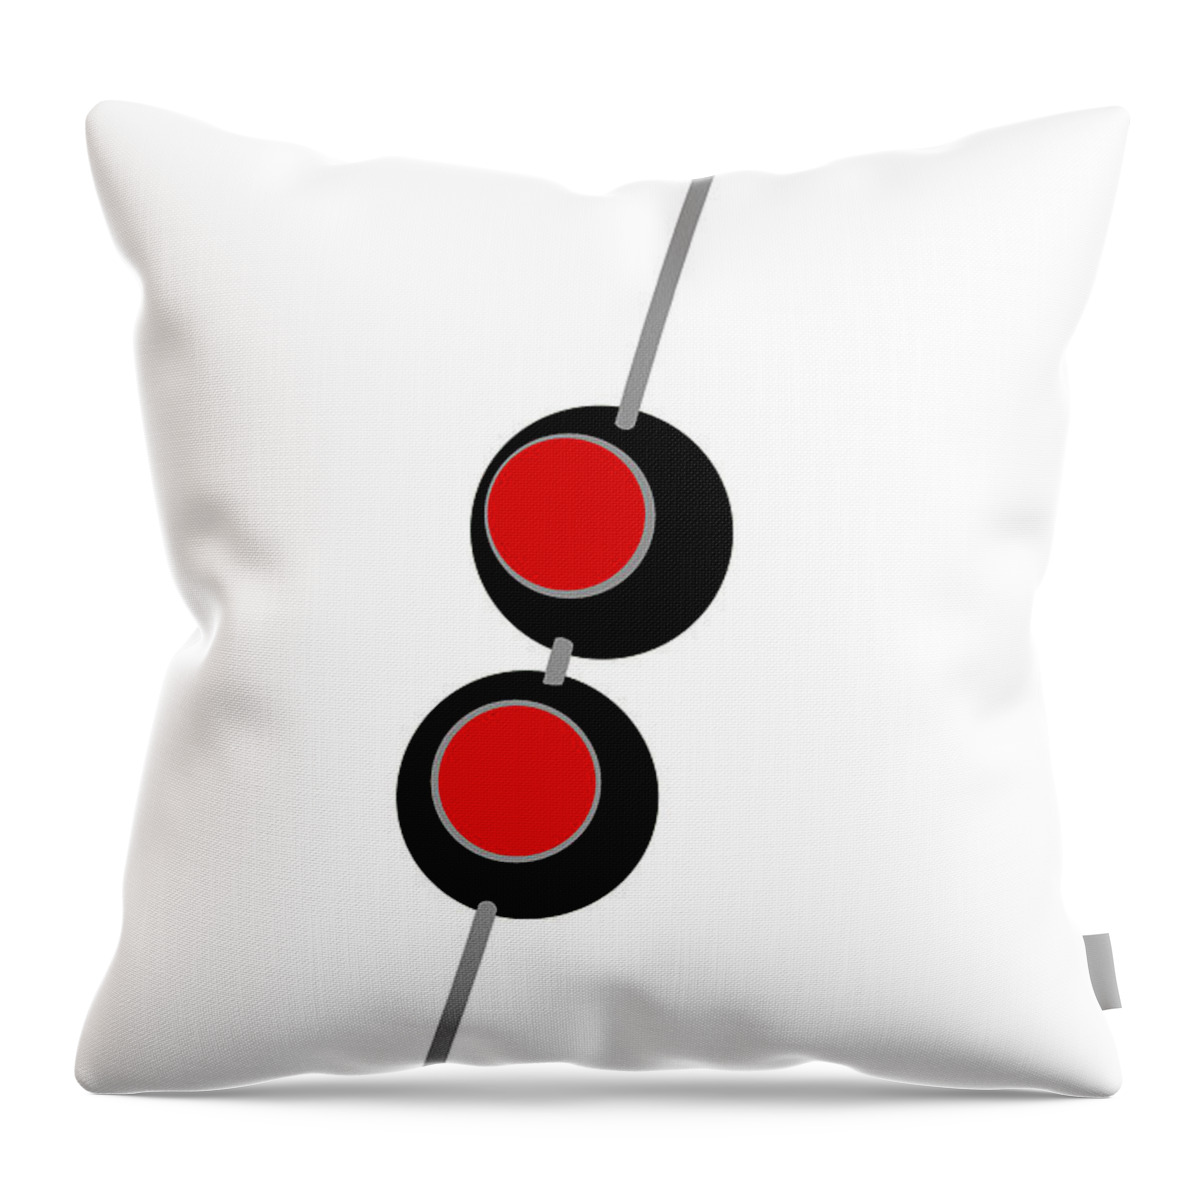 Richard Reeve Throw Pillow featuring the digital art Olives 2 by Richard Reeve